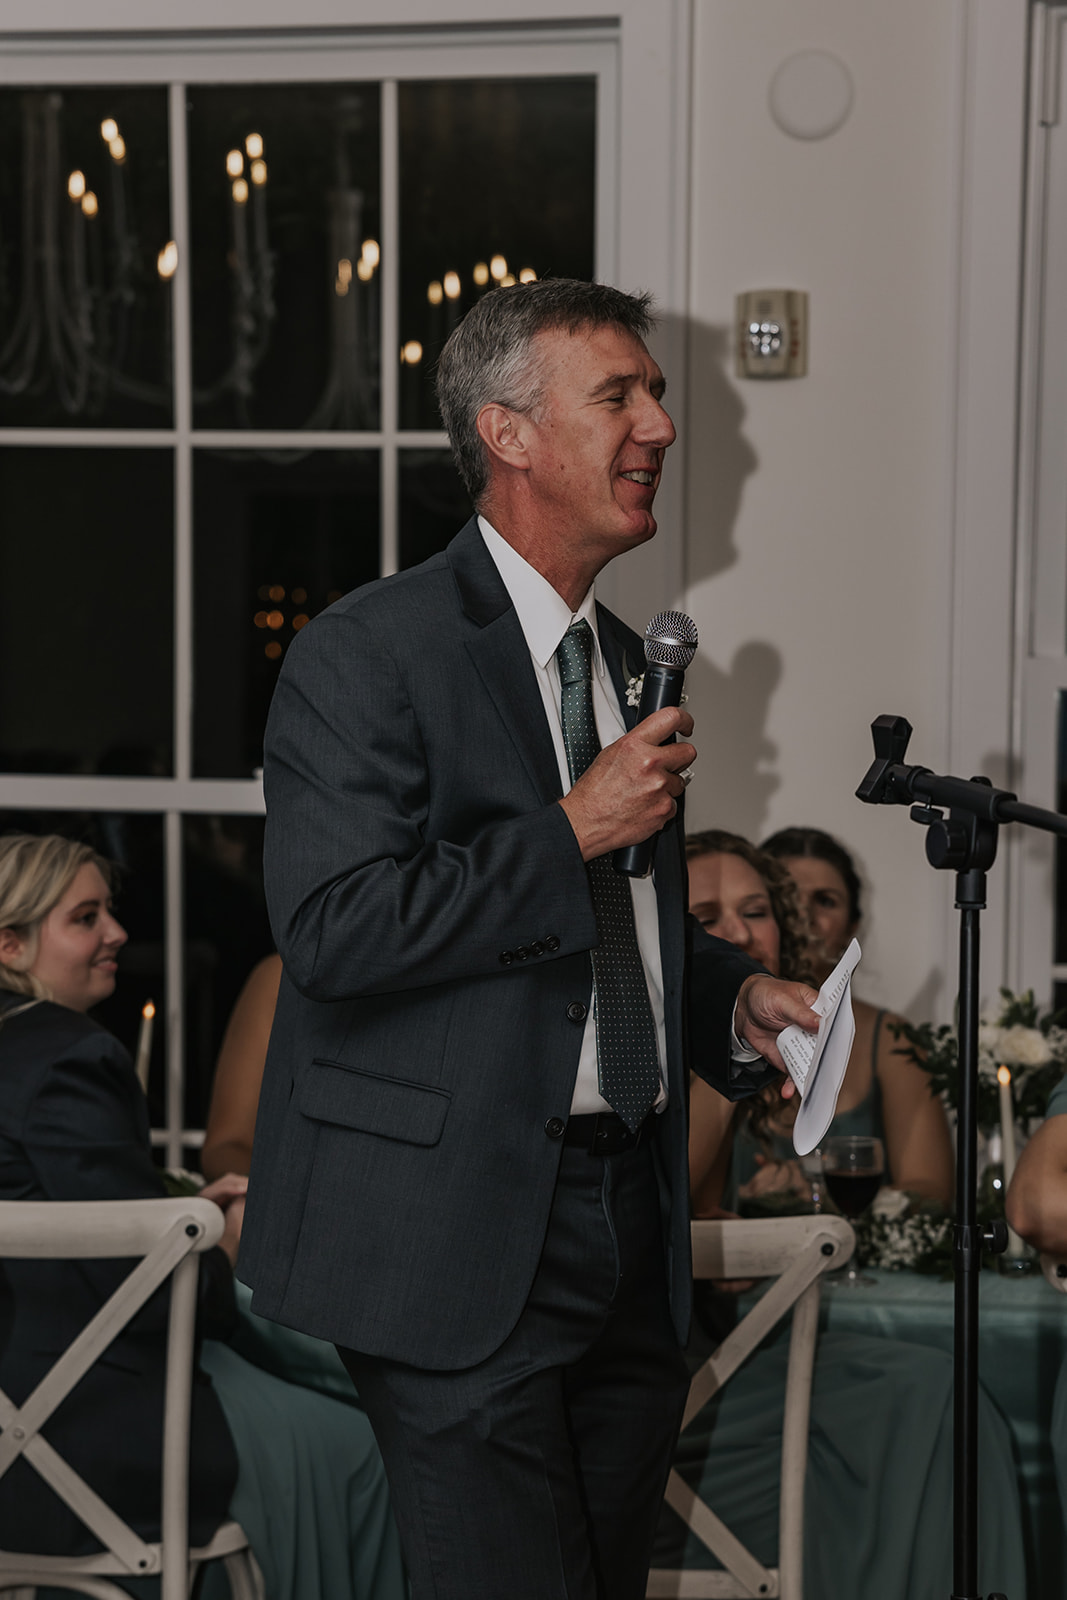 Brides dad gives toast during the dreamy Georgia wedding reception